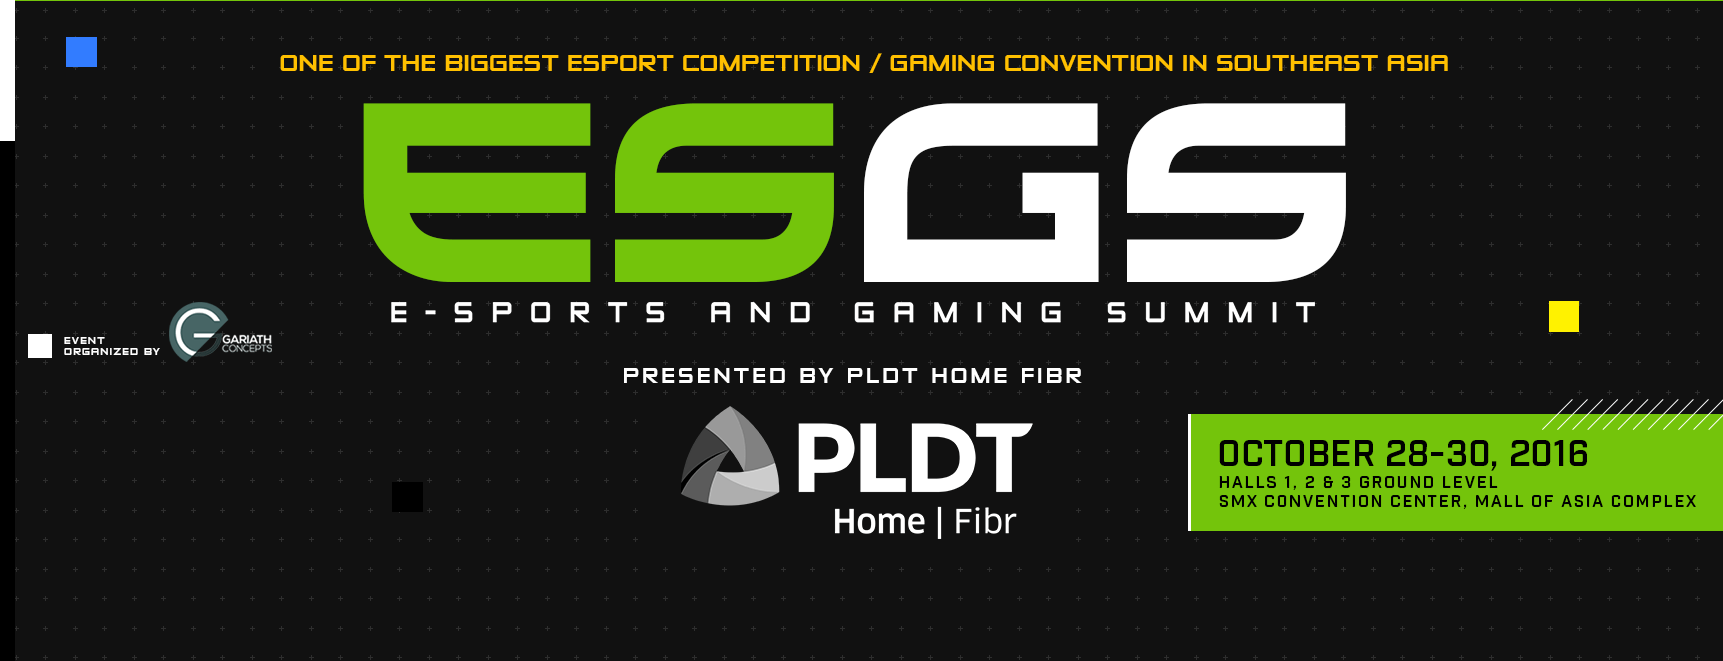 The Hype Continues with E-Sports and Gaming Summit 2016 26